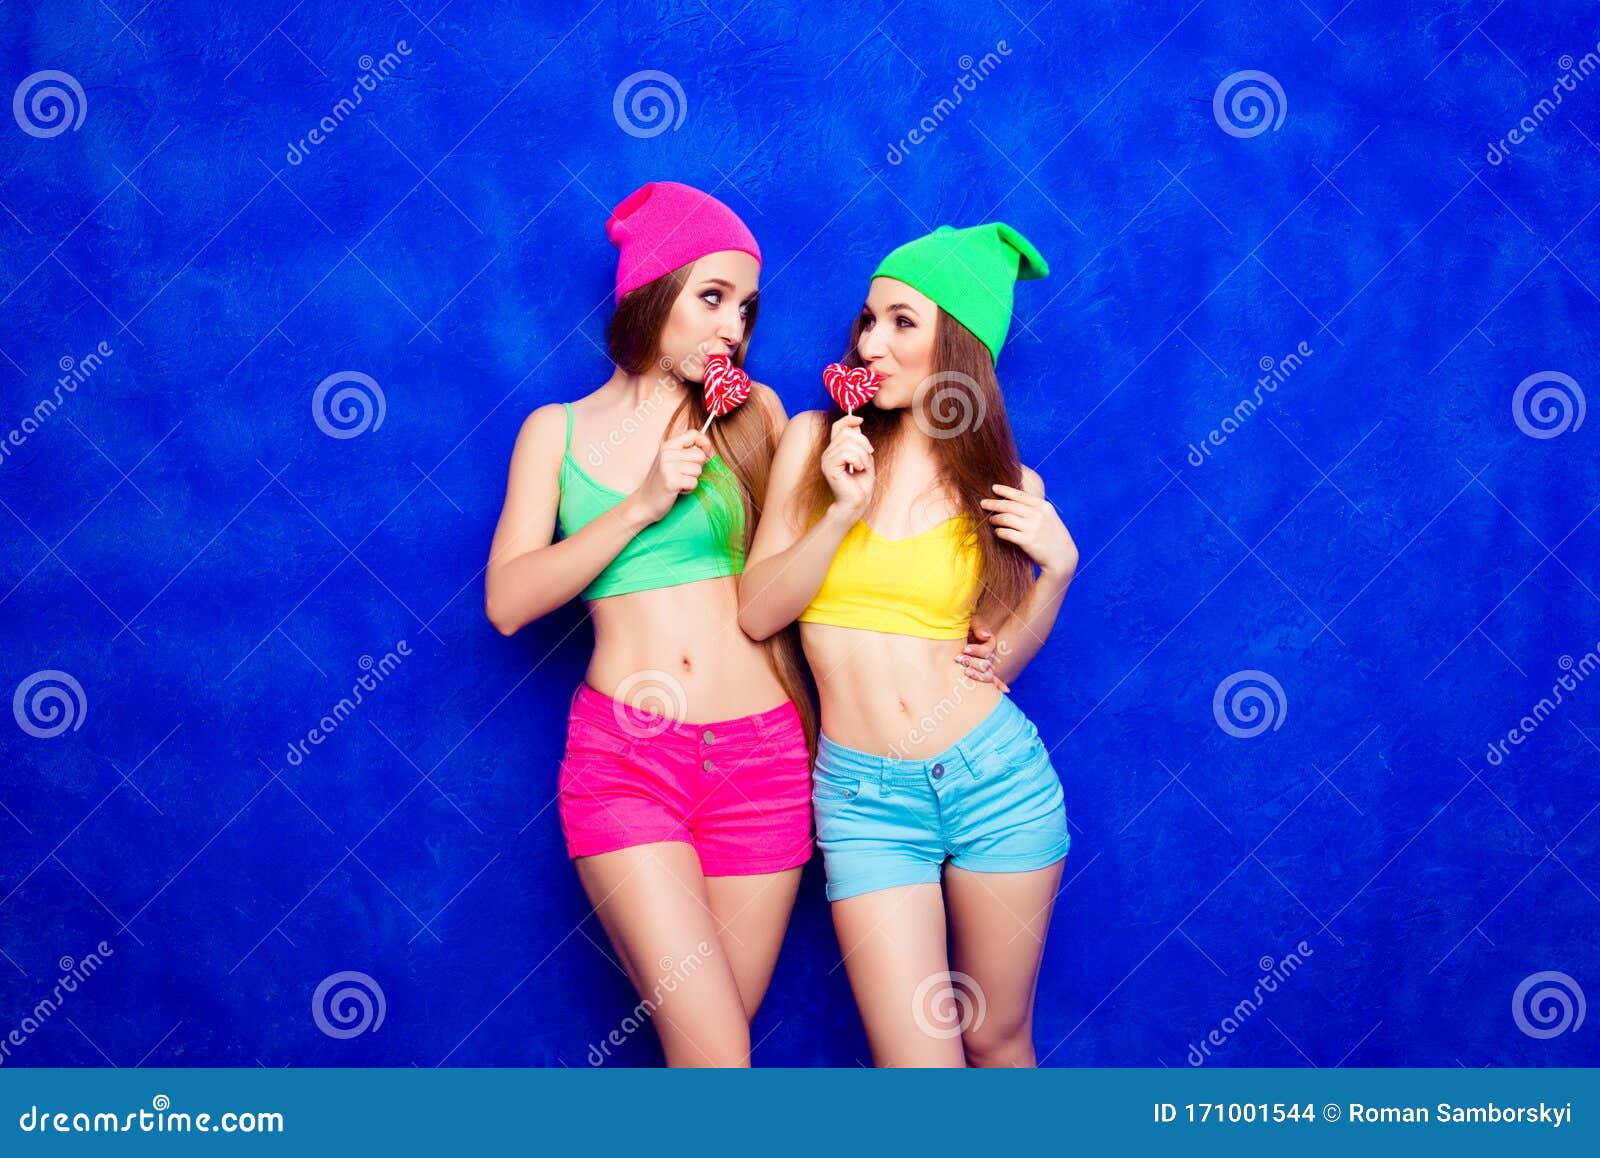 Beautiful Slim Sisters Licking Lollipops on Blue Background Stock Photo -  Image of family, holding: 171001544